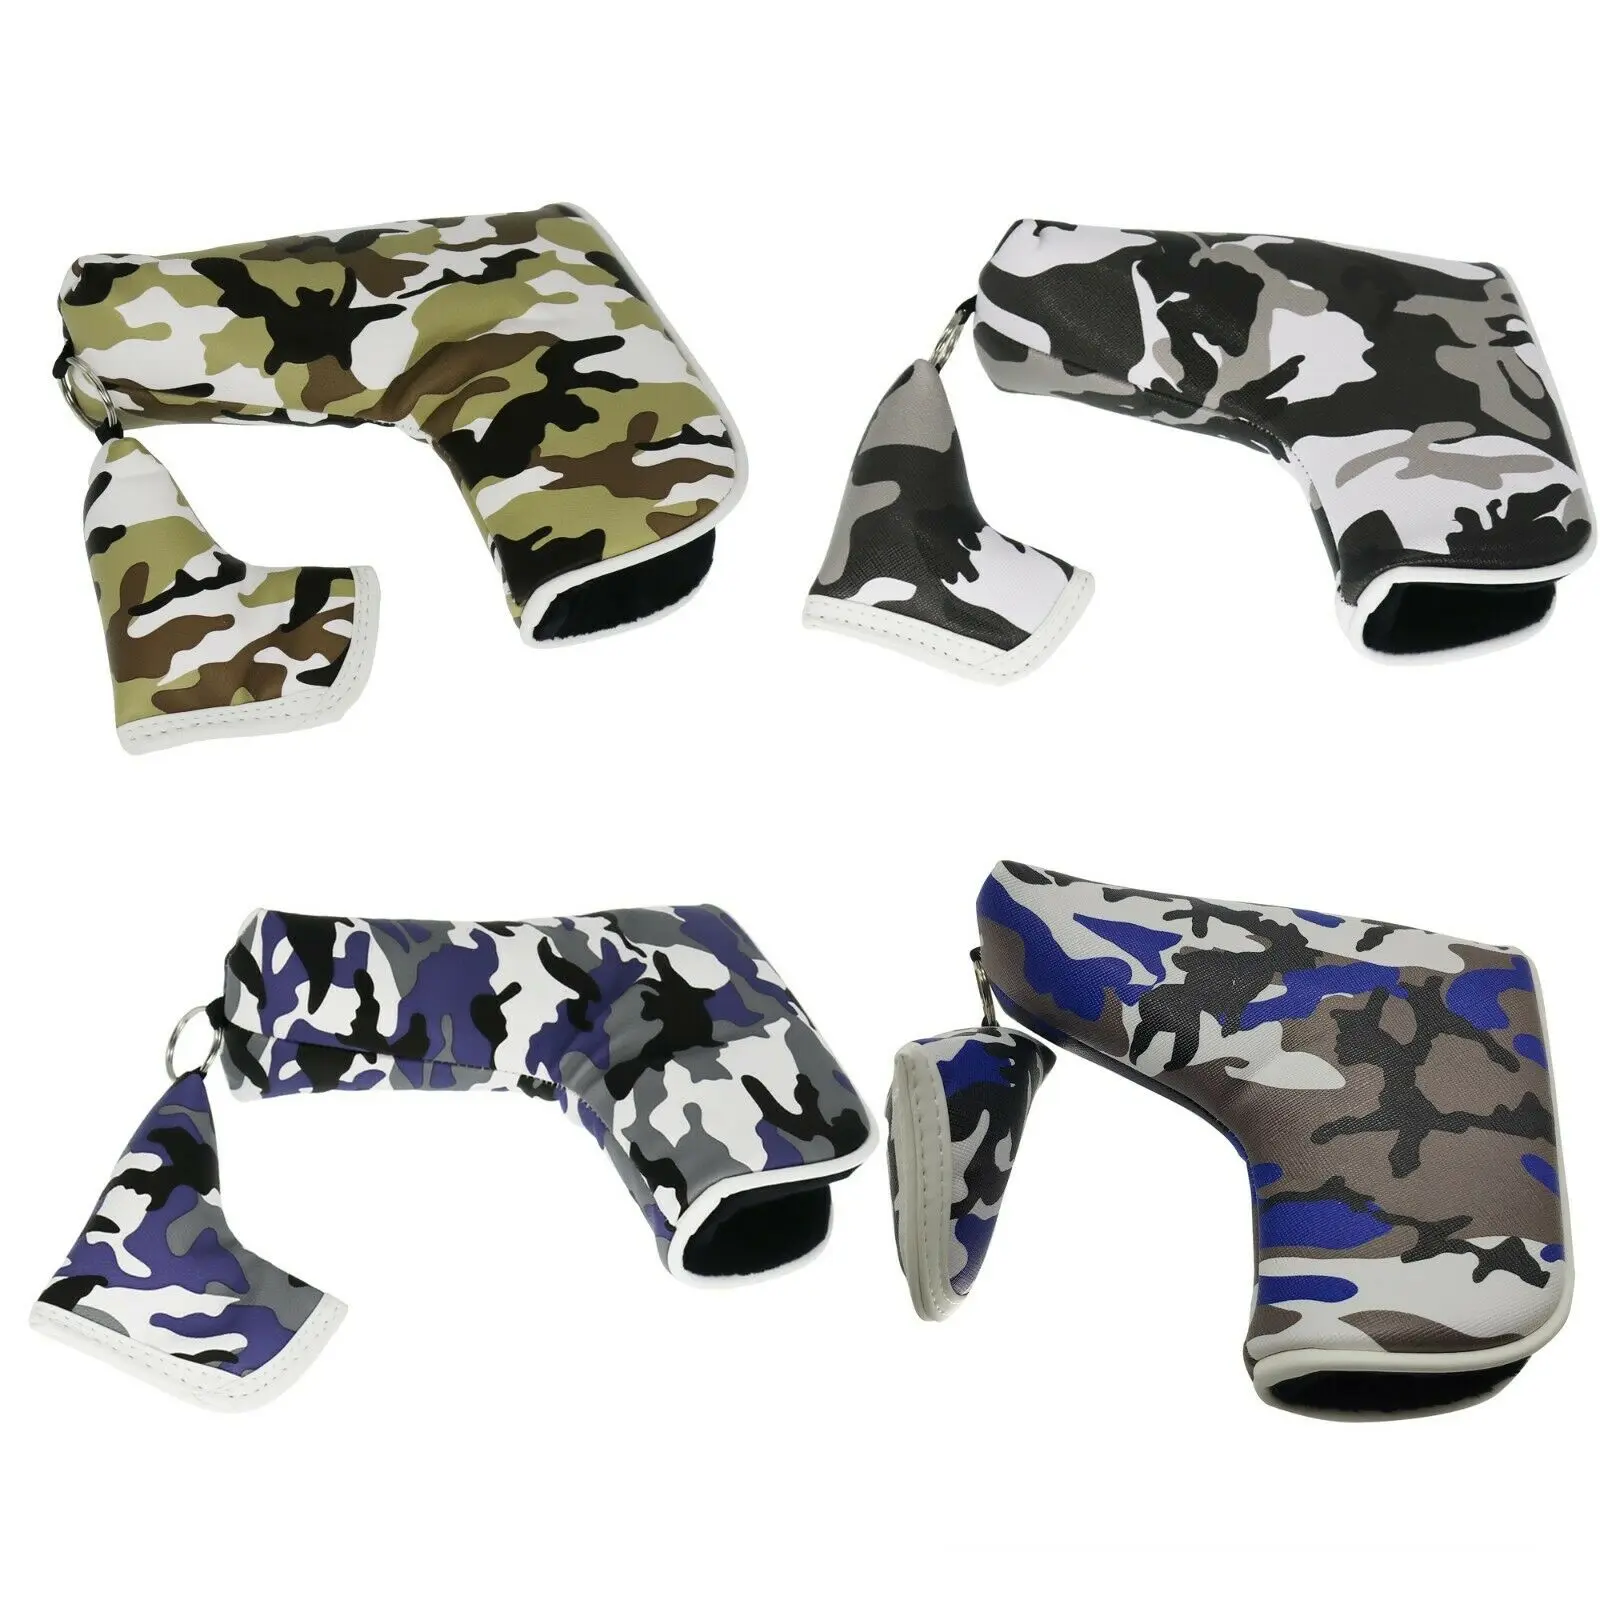 

Golf Head Cover Blade Putter Cover Protector Camouflage Pattern Soft PU Headcover 4 Color For Choose